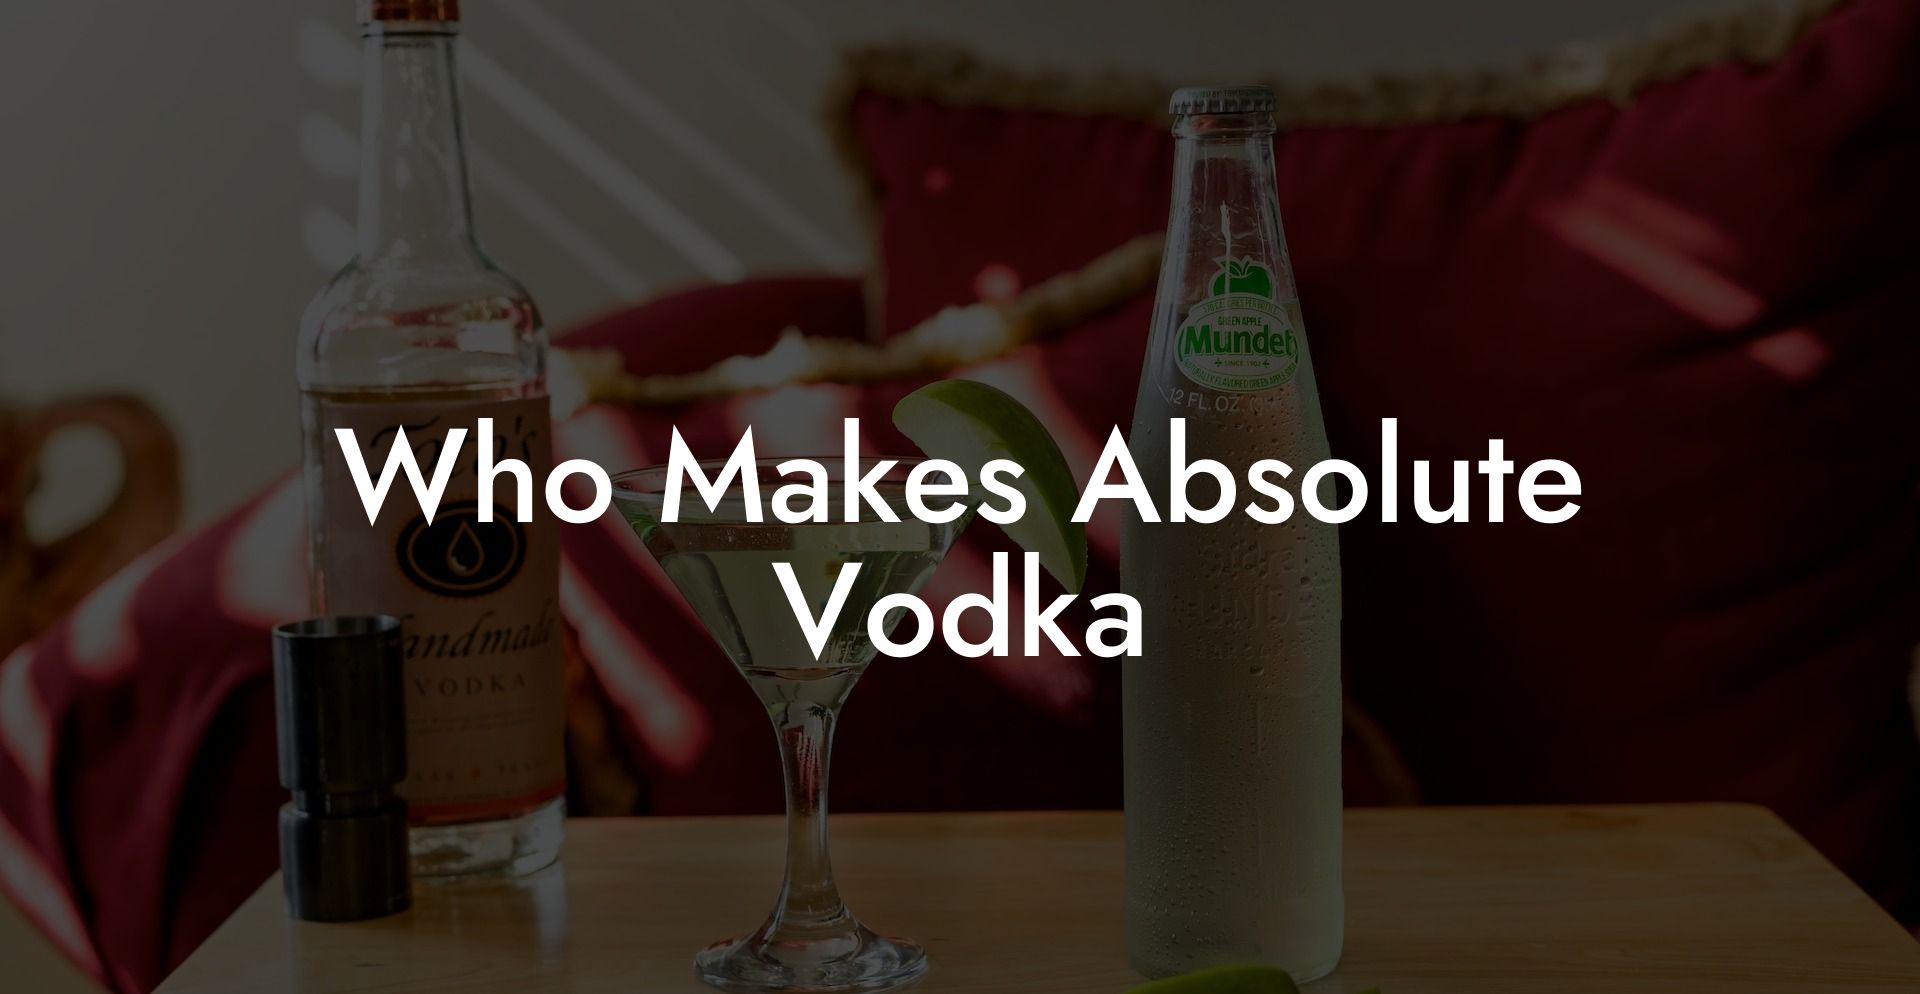 Who Makes Absolute Vodka